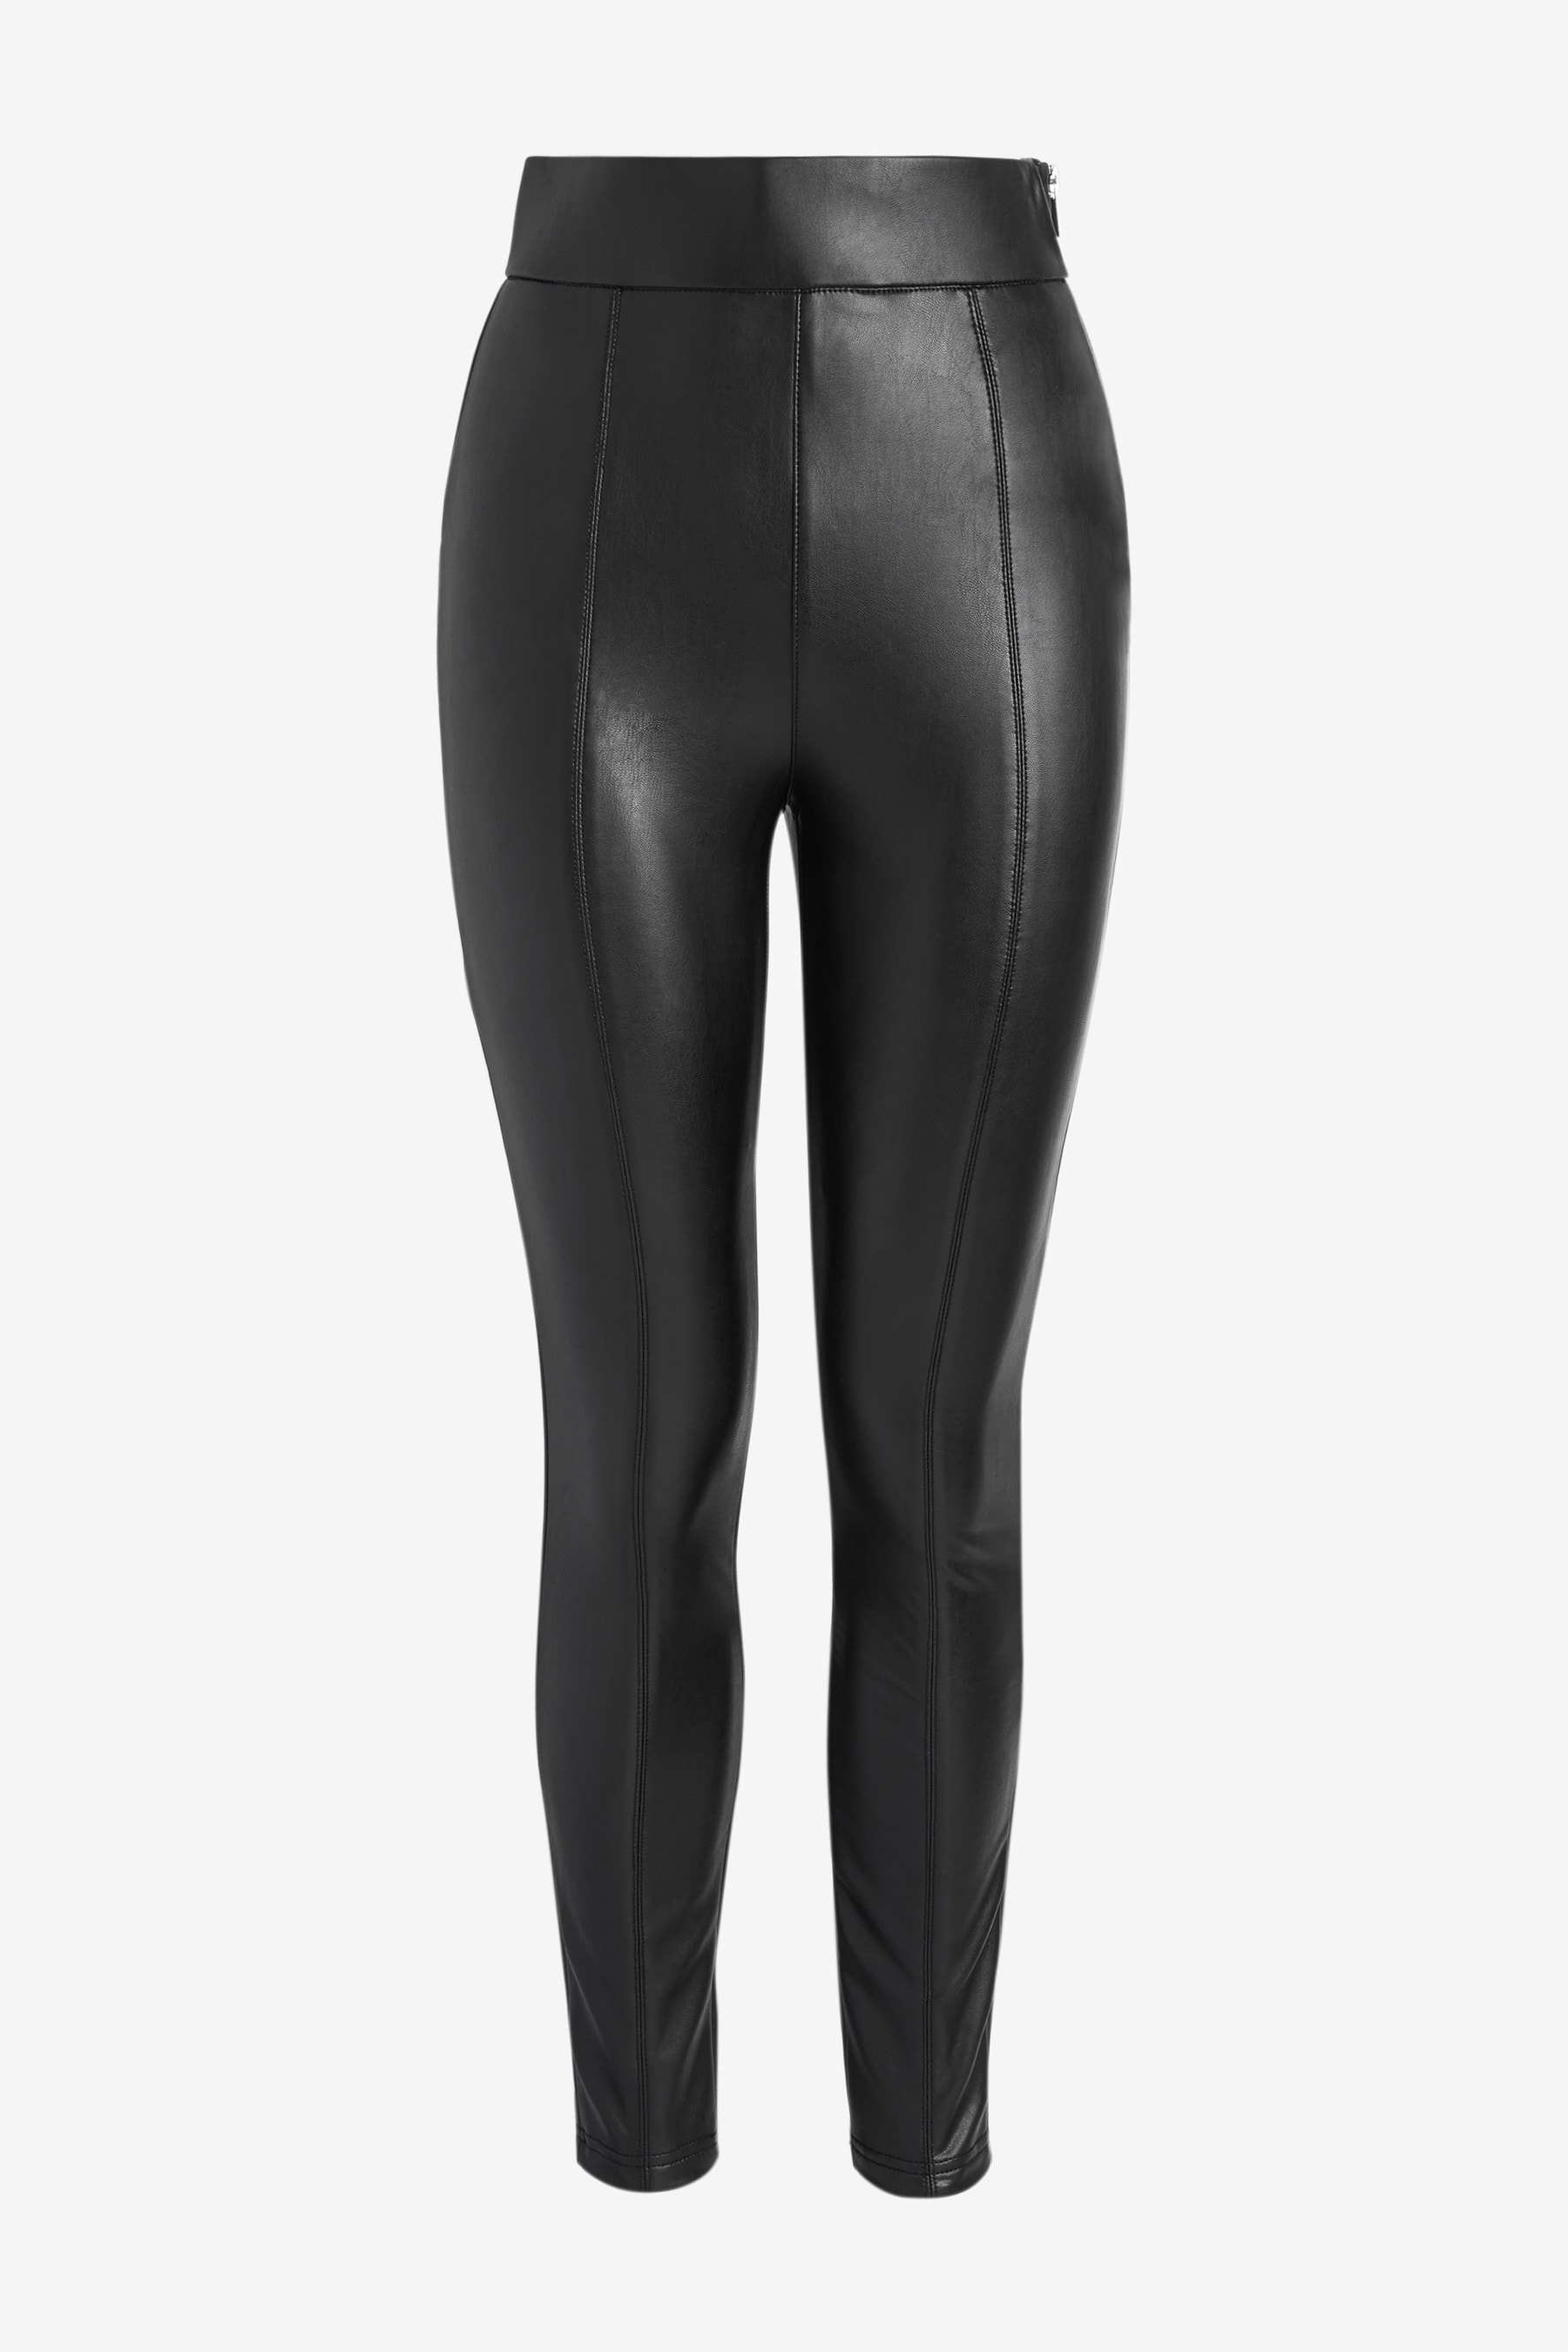 Buy Black Faux Leather PU Comfort Leggings from the Next UK online shop